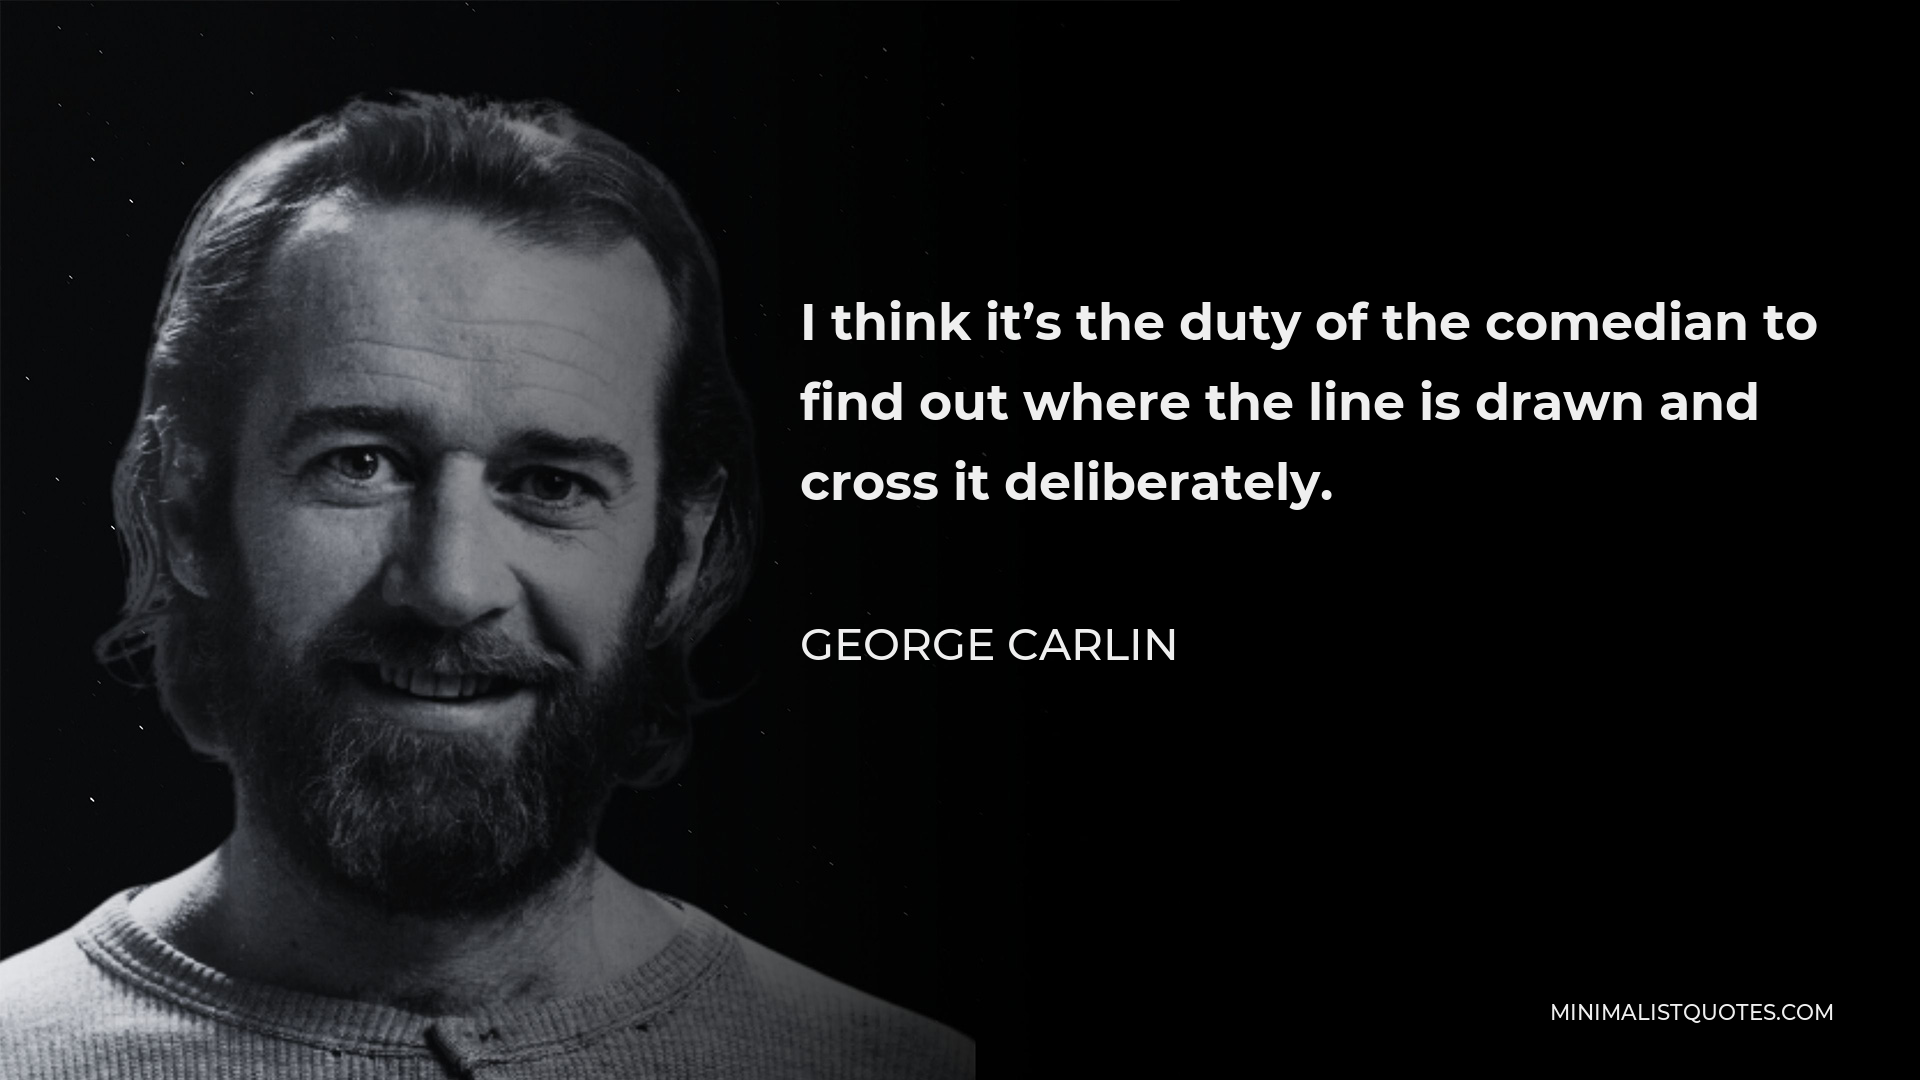 George Carlin Quote - I think it’s the duty of the comedian to find out where the line is drawn and cross it deliberately.